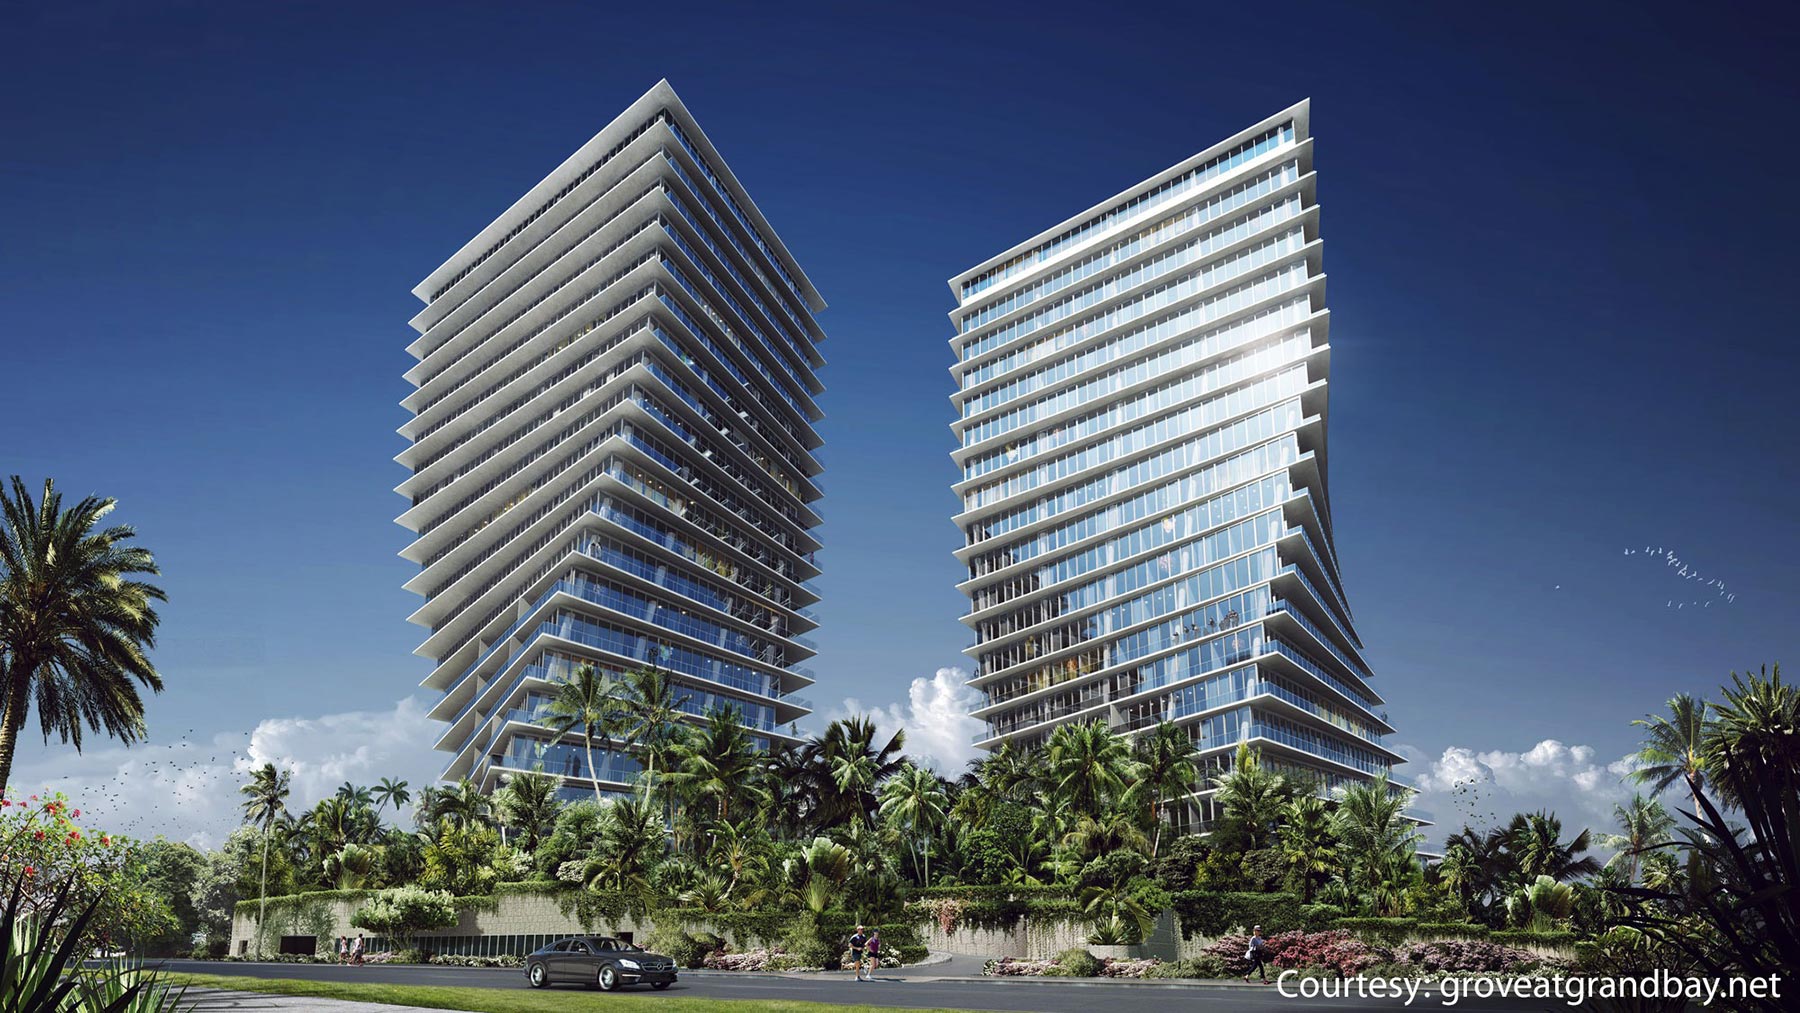 The Grove at Grand Bay’s condos are among Miami’s most-coveted residences.   Image courtesy of groveatgrandbay.net